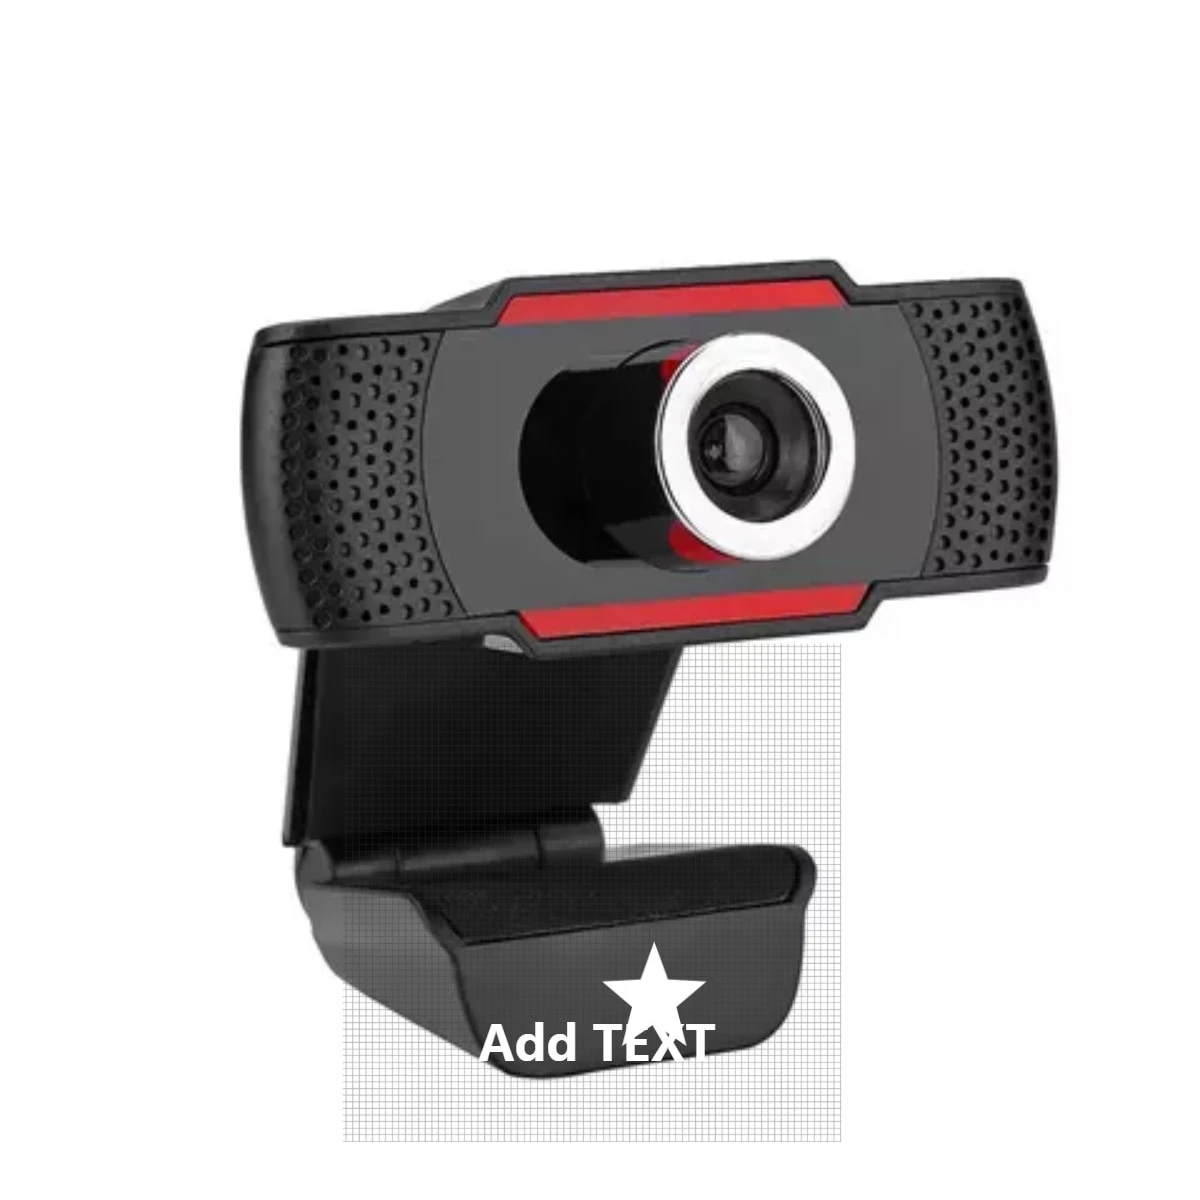 China Factory Wholesale 1080P Live Broadcast HD WebCam for Work and Study at Home